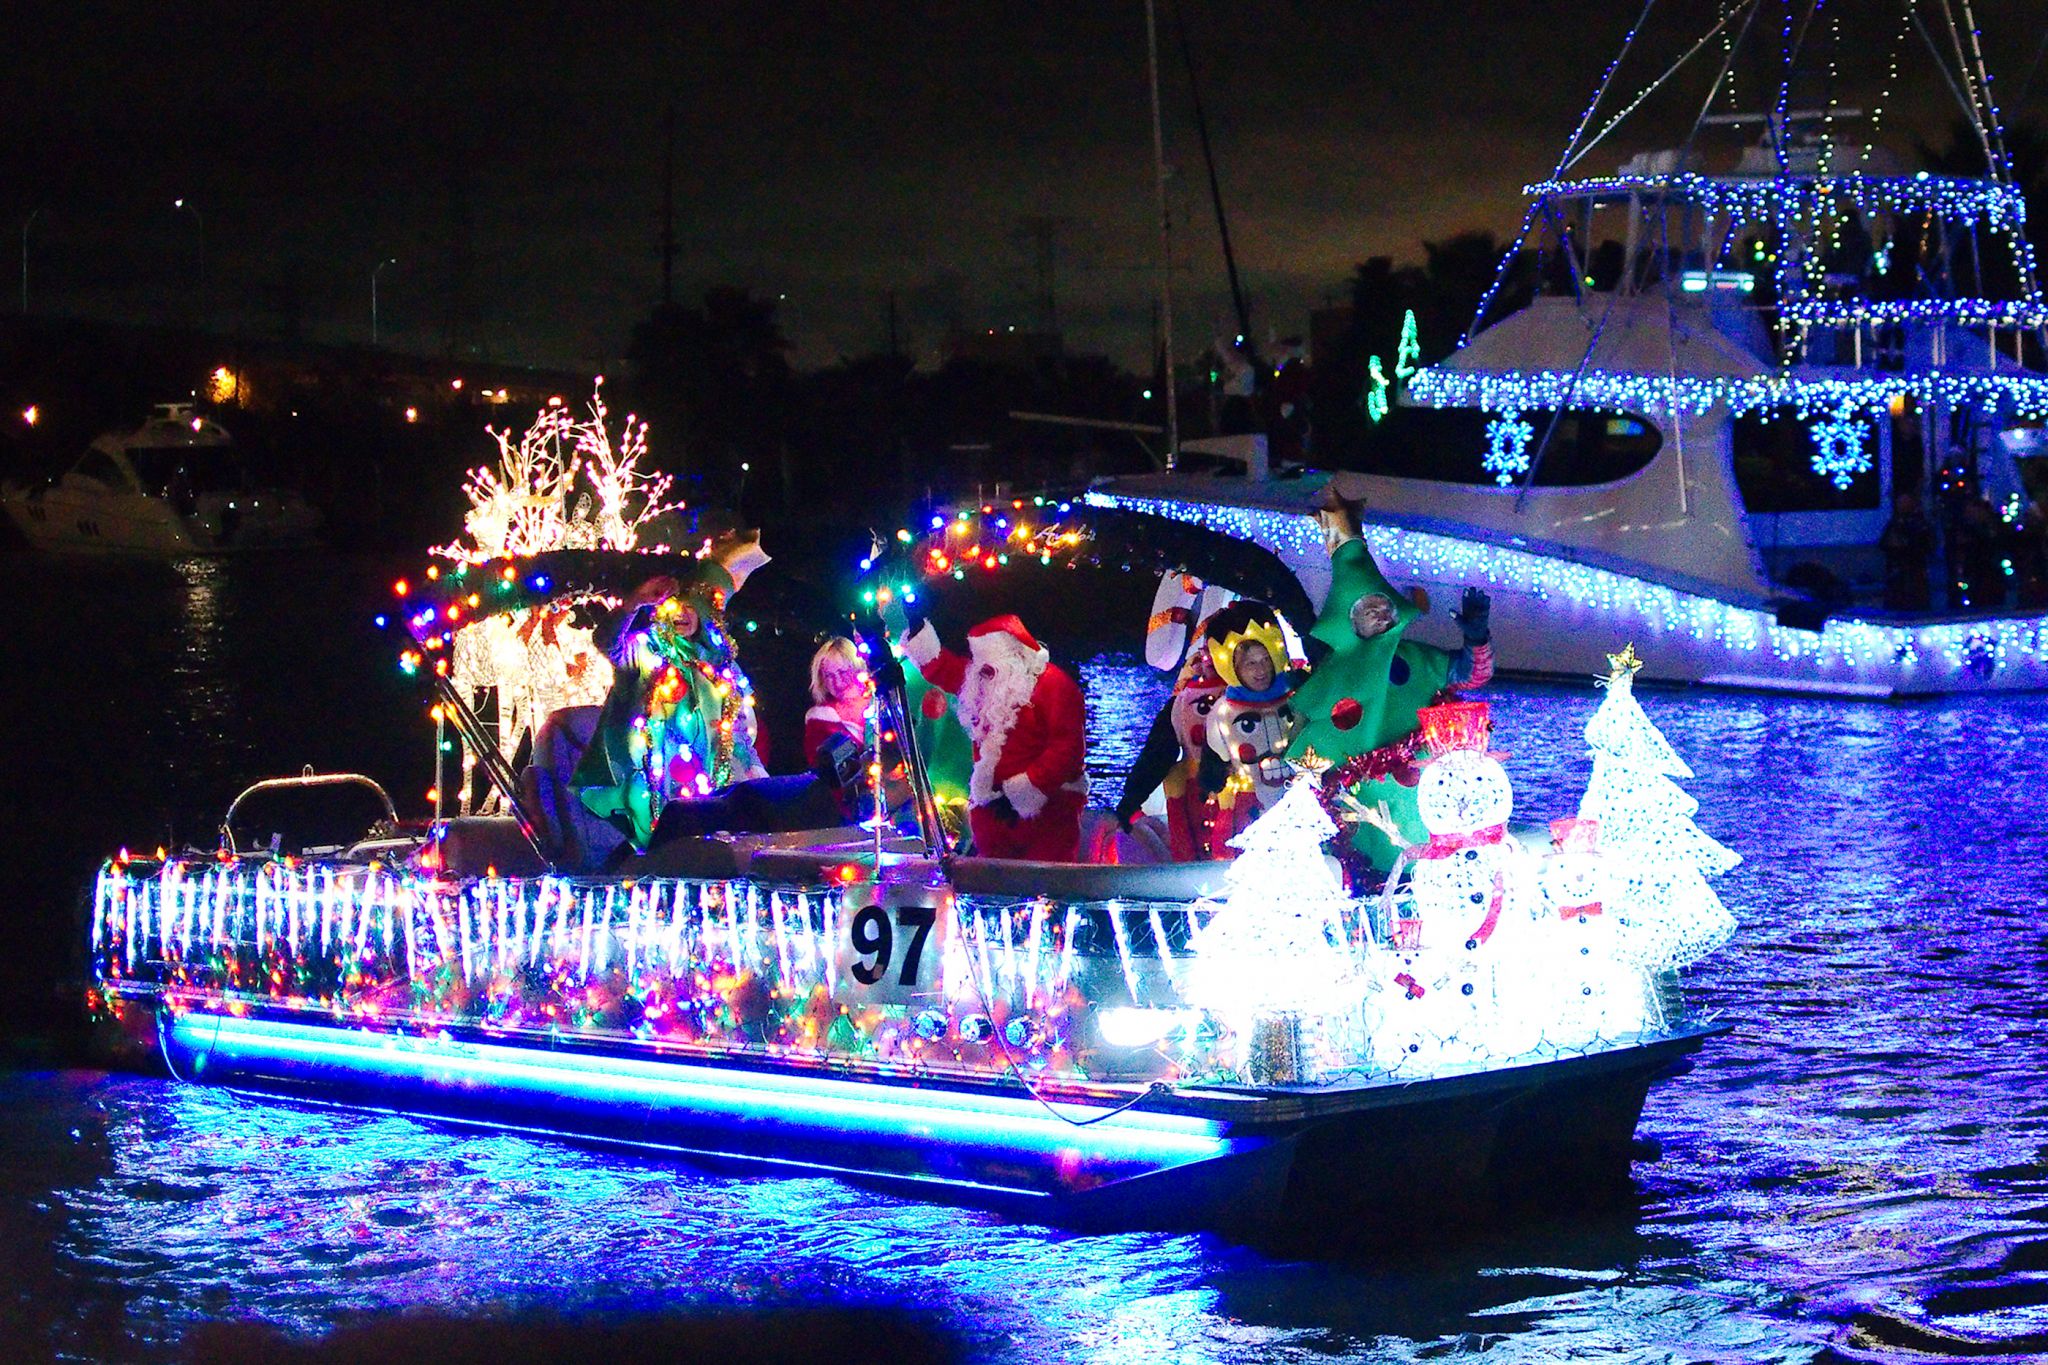 PHOTOS Holidaydecorated boats light up Kemah for annual parade